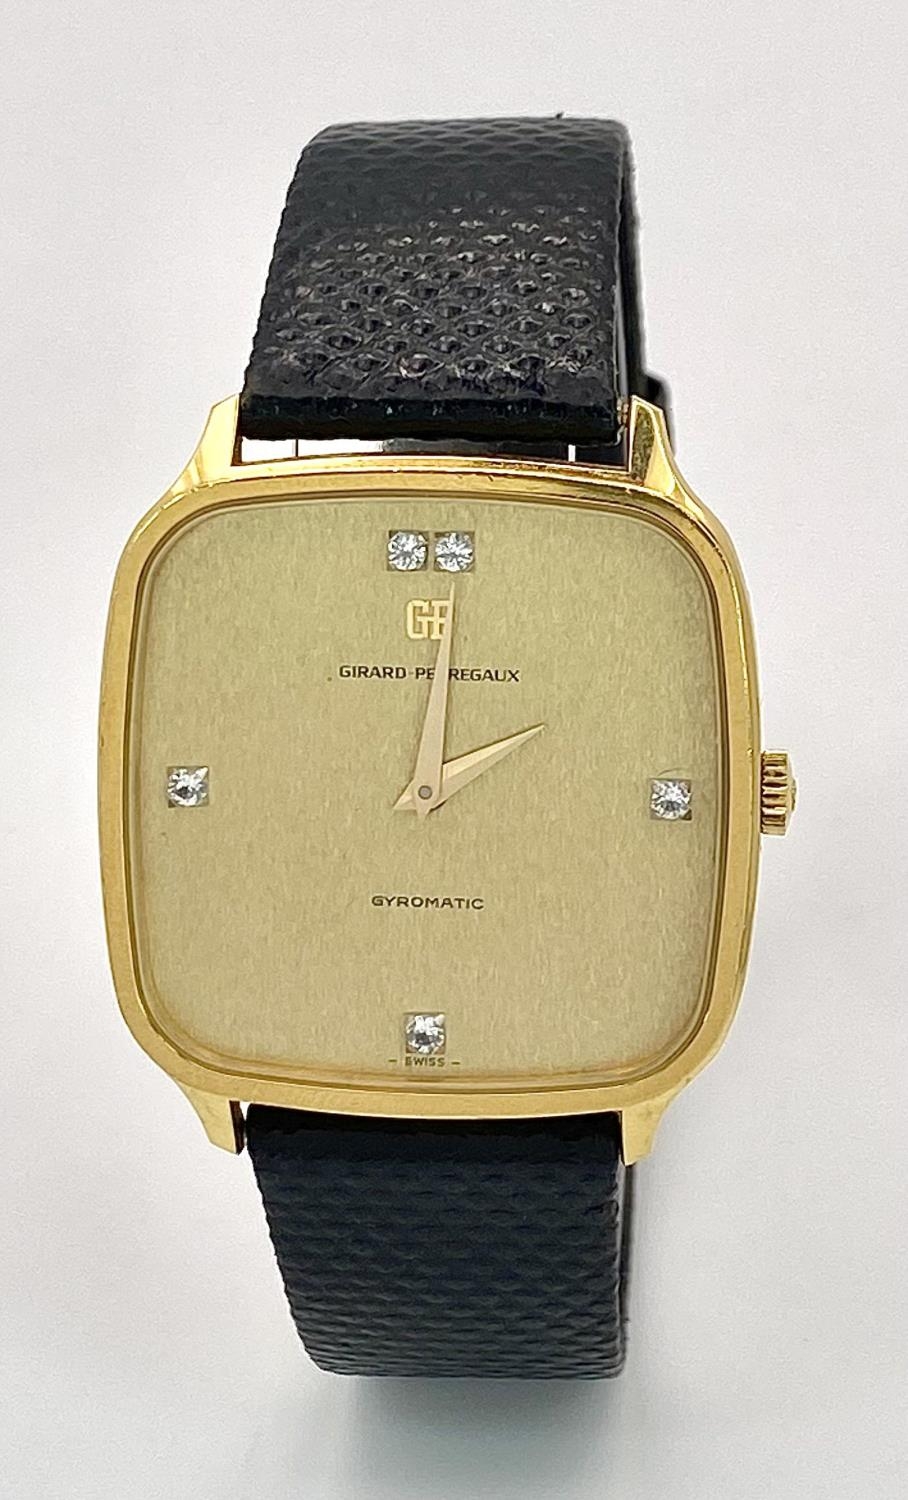 A Girard Perregaux Gold Plated Gyromatic Gents Watch. Black leather strap. Gold plated case - - Image 2 of 6